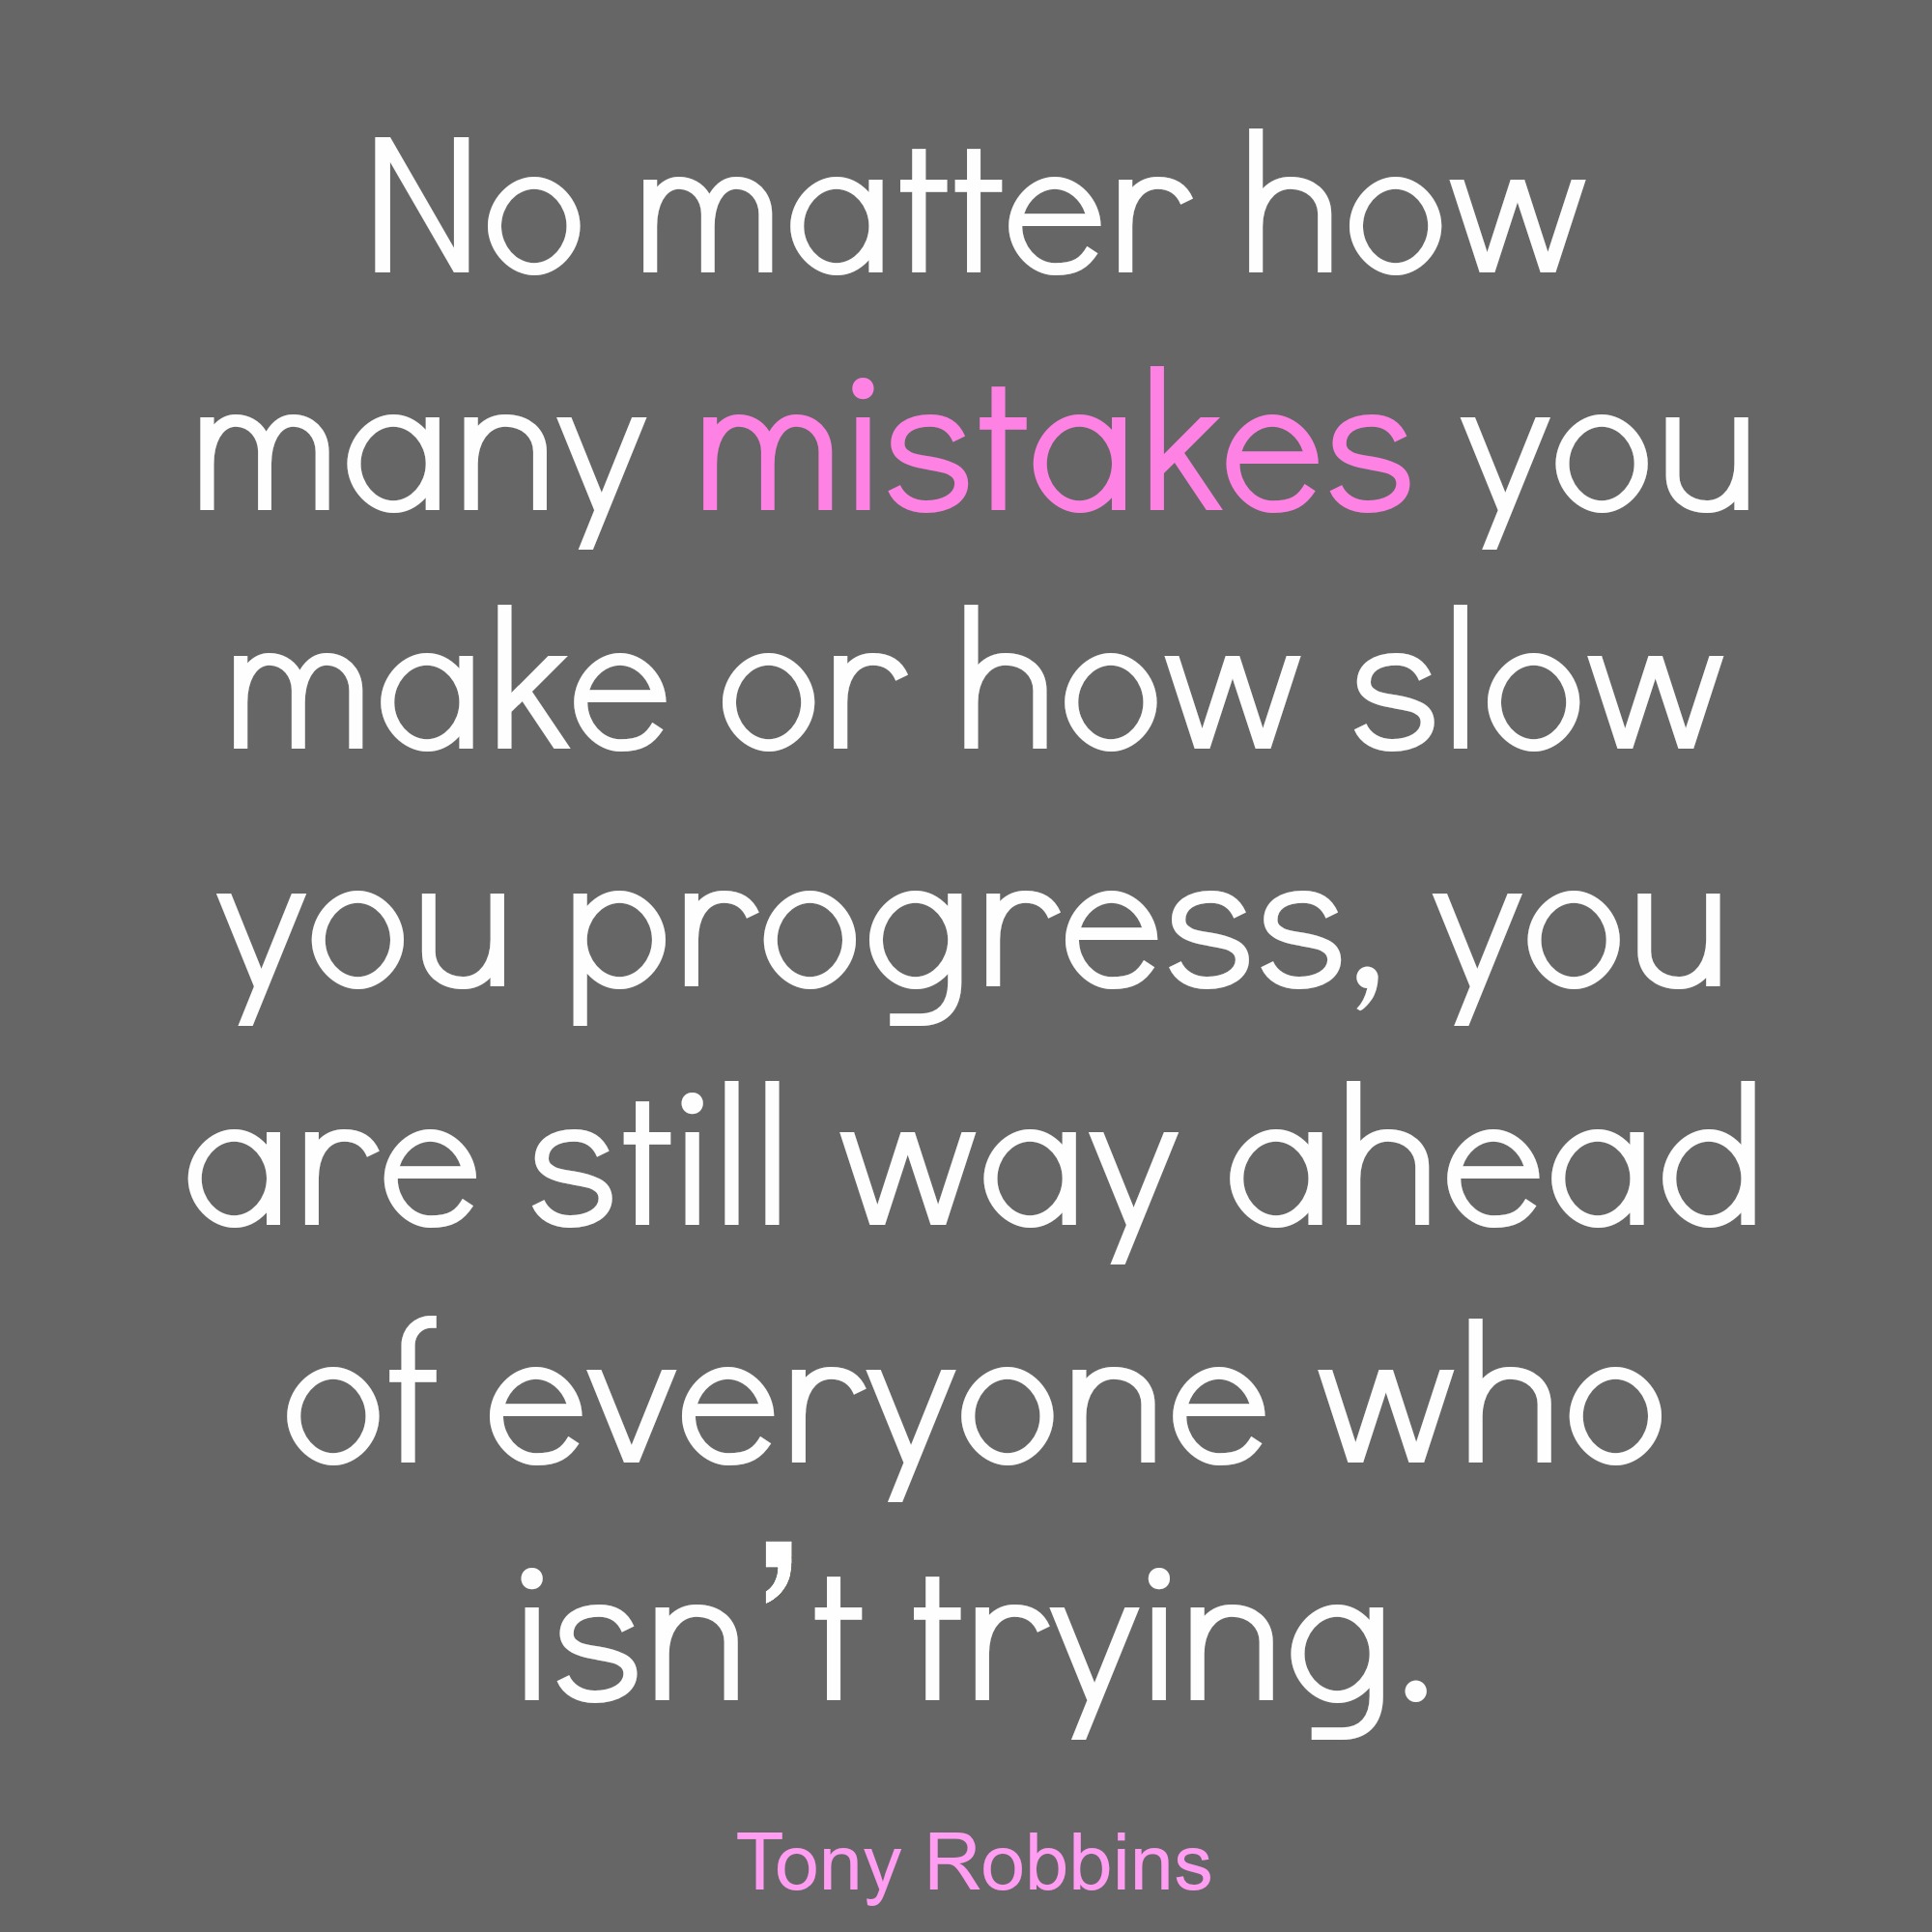 No matter how many mistakes you make or how slow you progress, you are still way ahead of everyone who isn’t trying. Tony Robbins